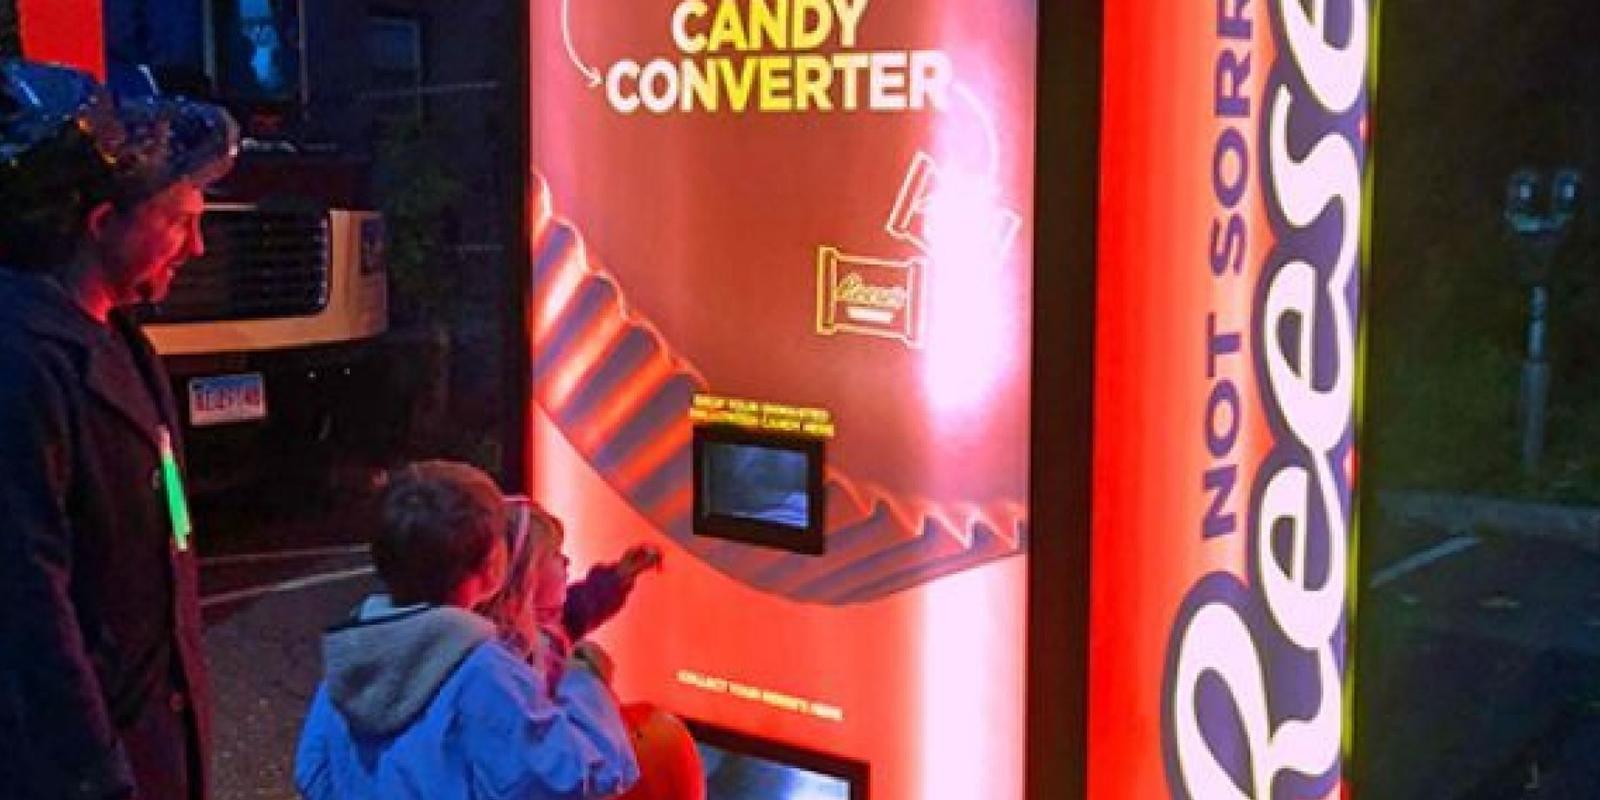 Reese's Candy Converter The Hershey Company